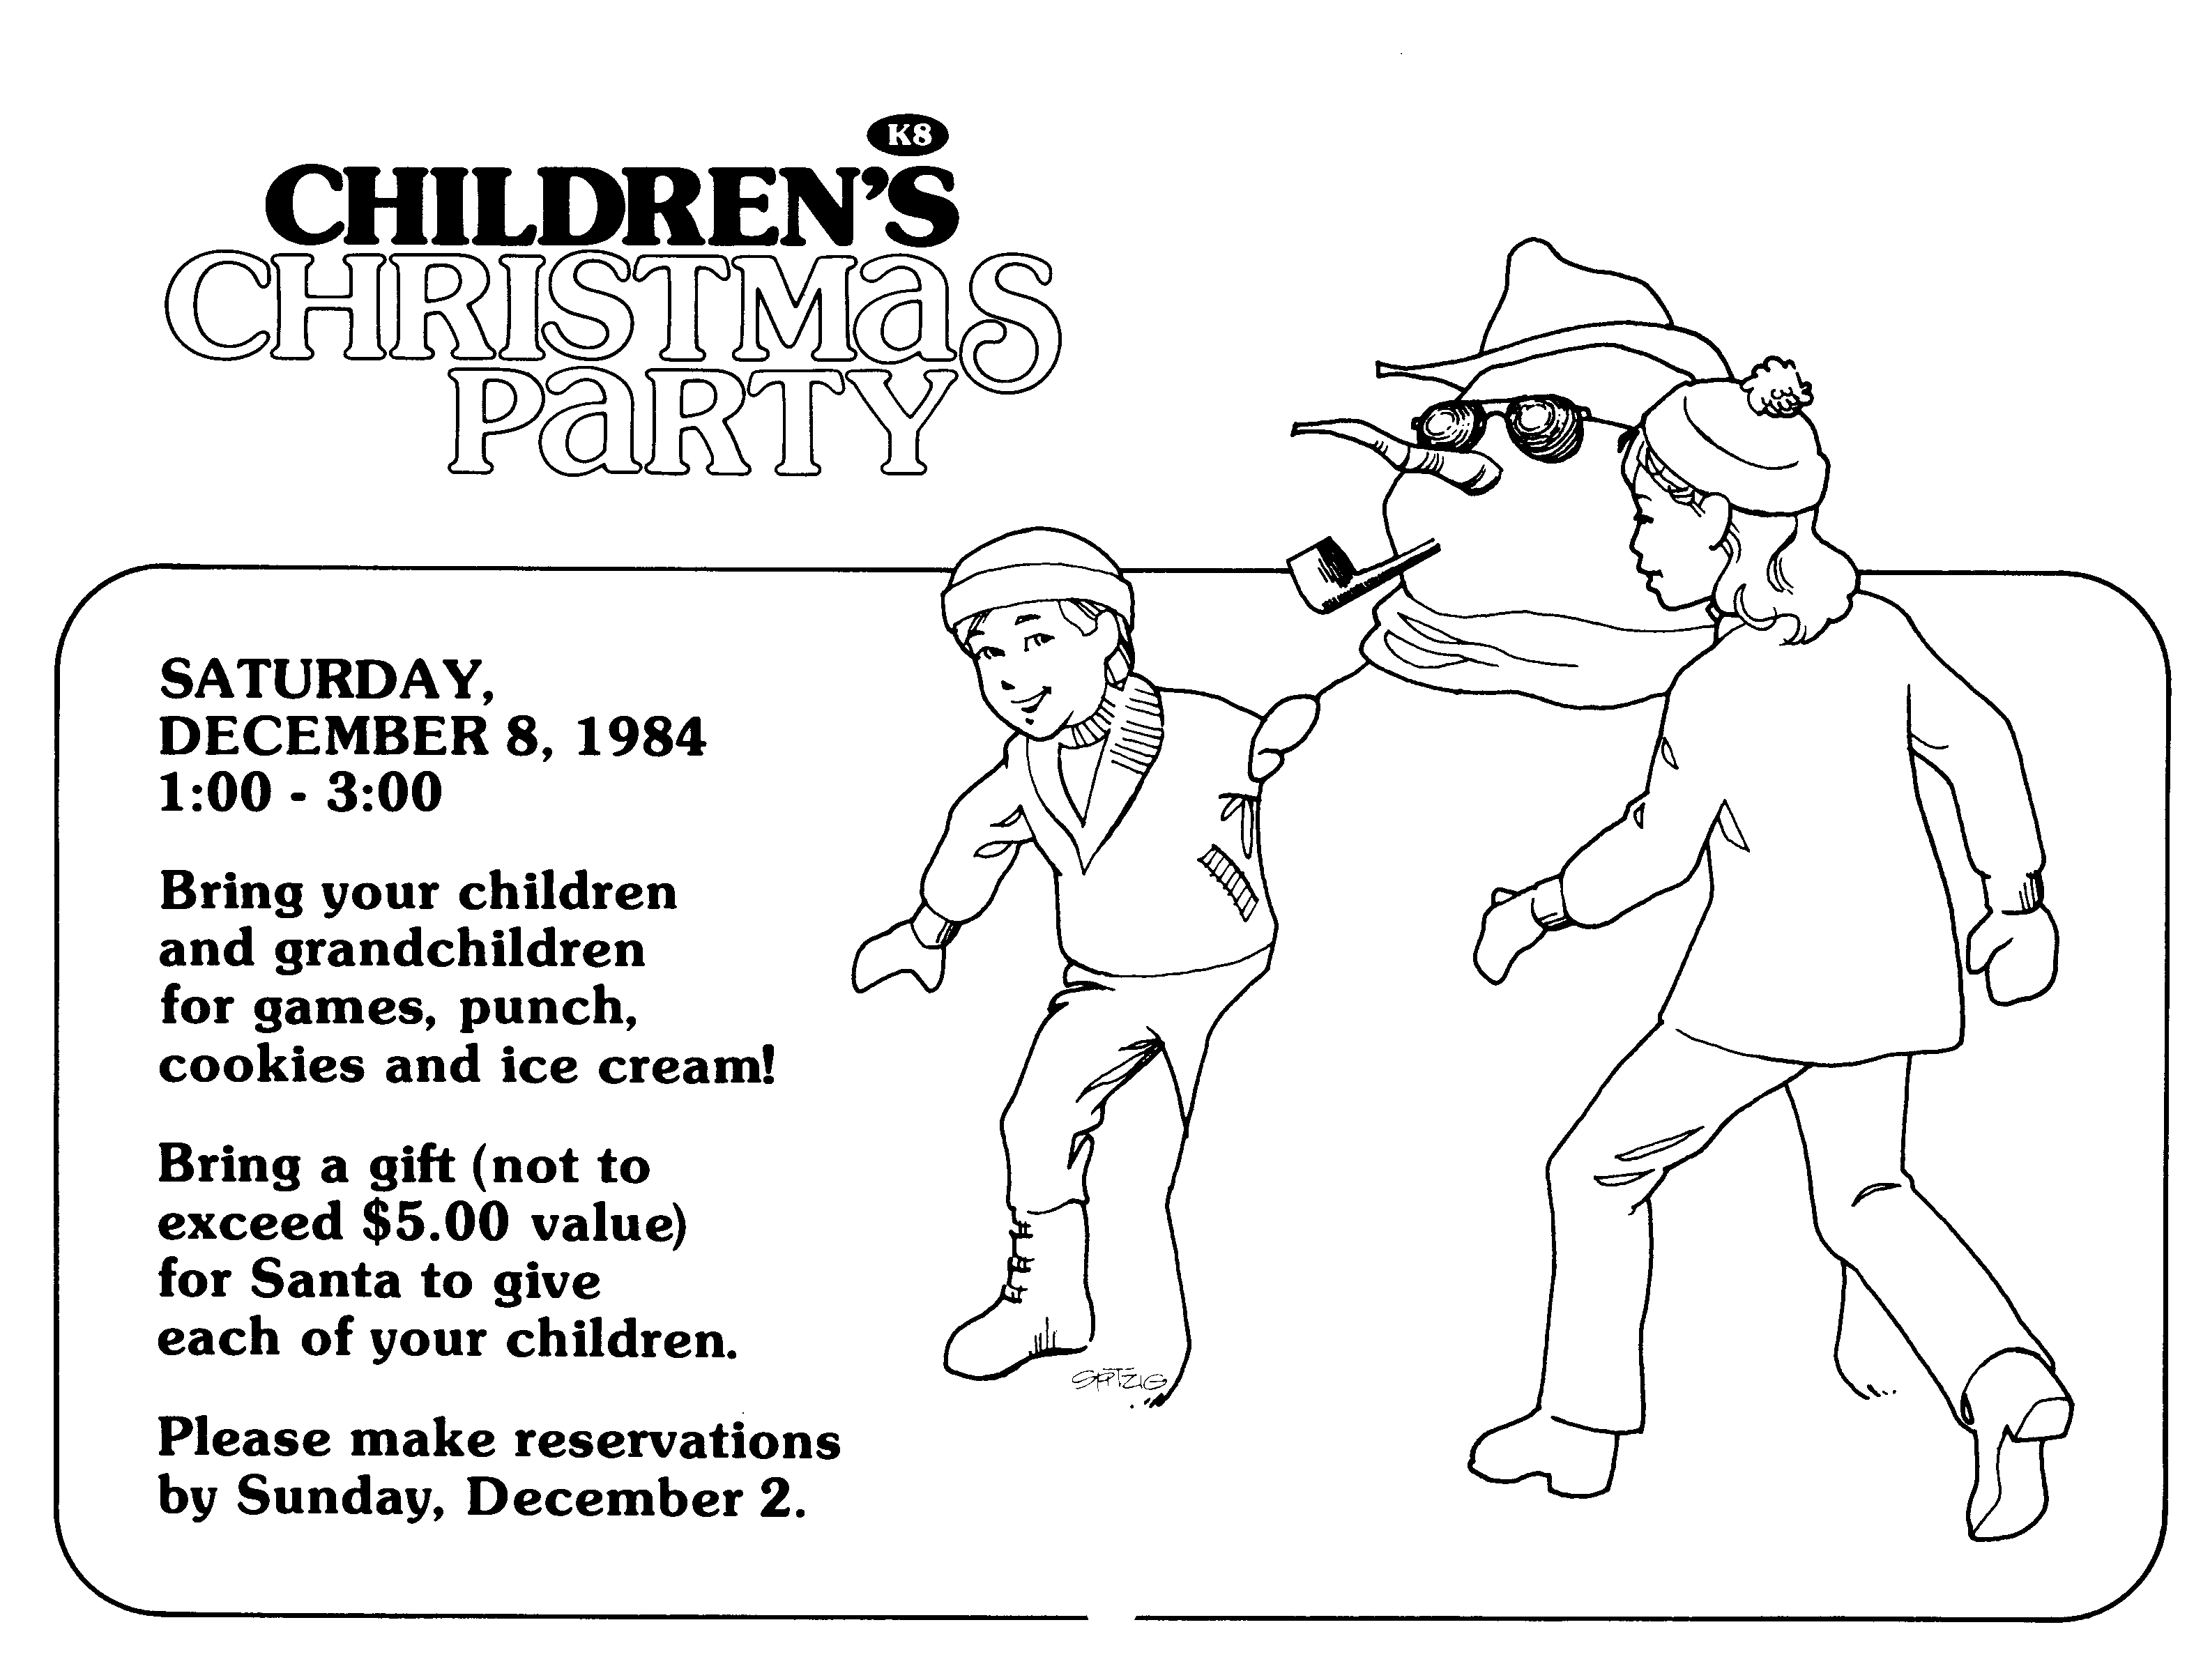 A flier for a children's Christmas party at a country club.